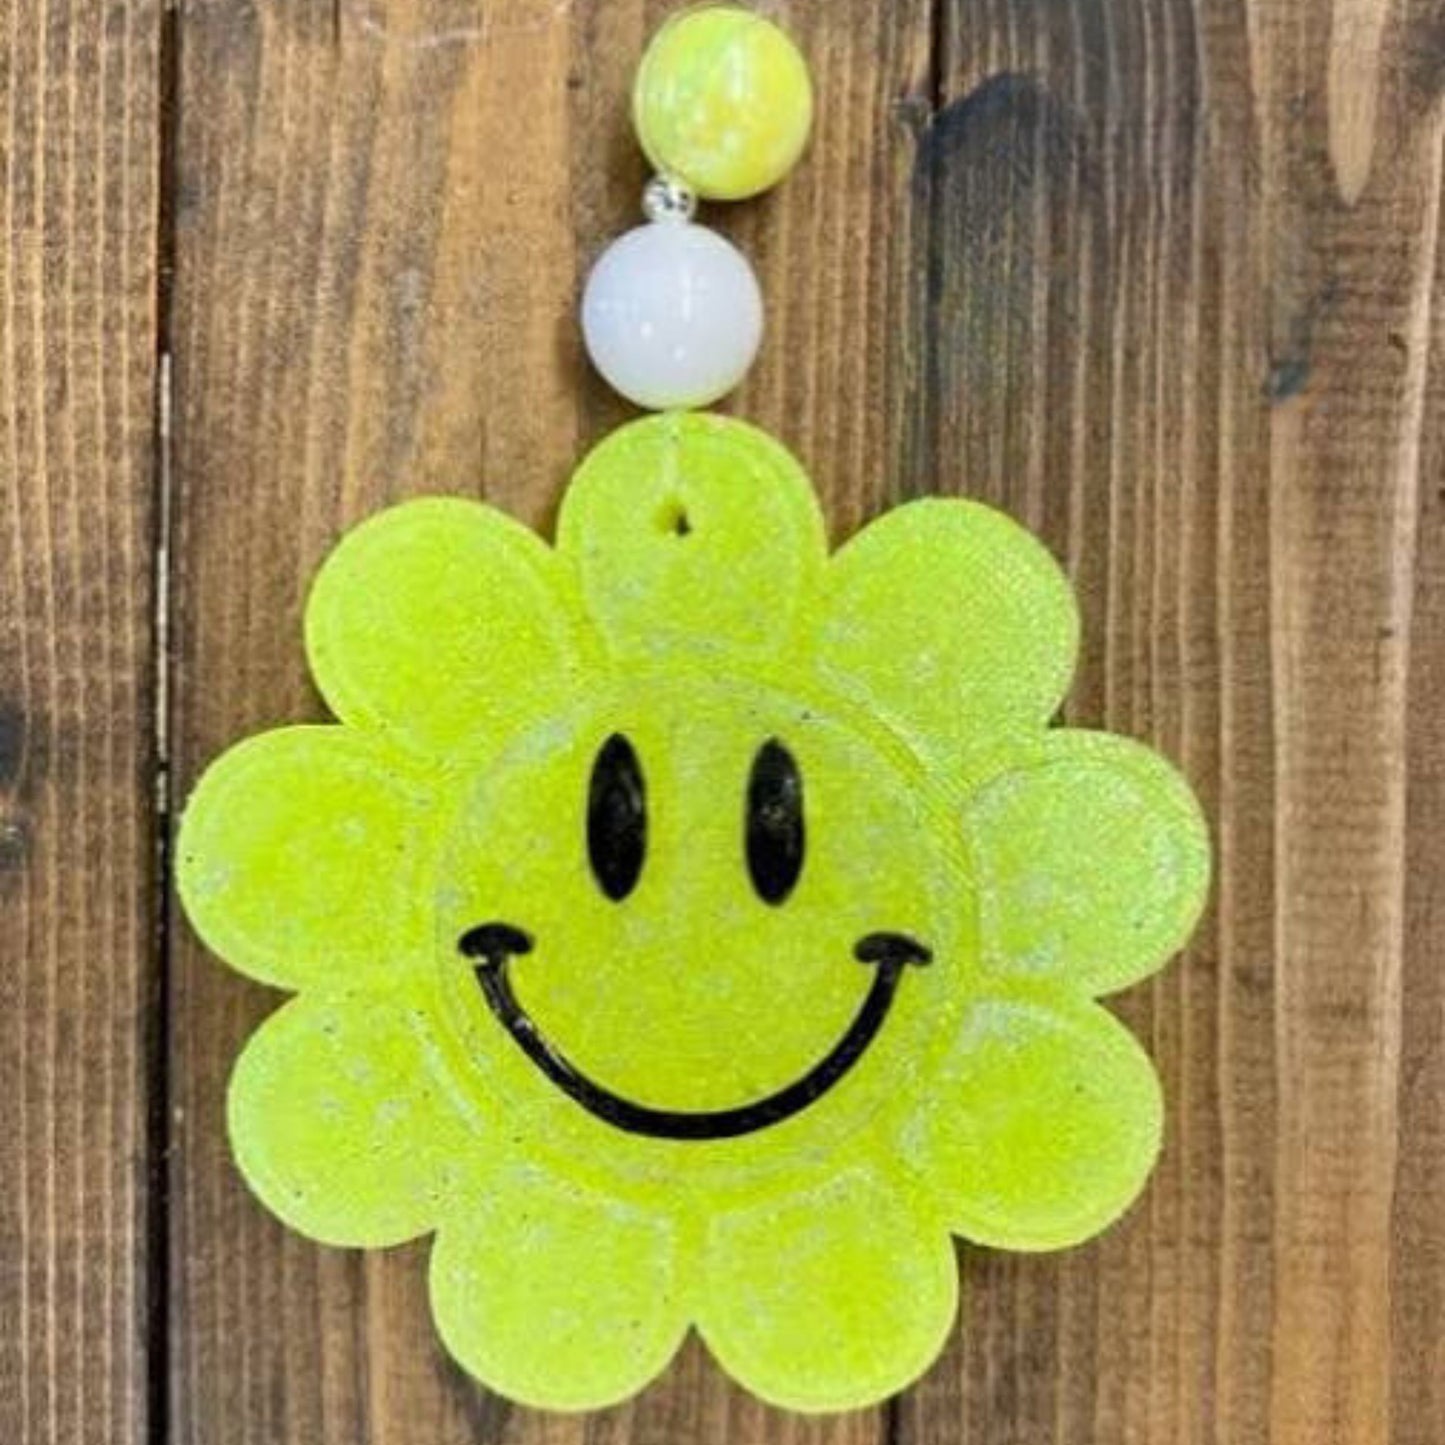 Smiley Face Flower Retro Boho 80’s Car Freshie Silicone Mold | 3.5 x 3” x 0.08” inches for Scented Aroma Beads Car Candle, Soap Oven Safe to 450 F Bake Heat Resistant